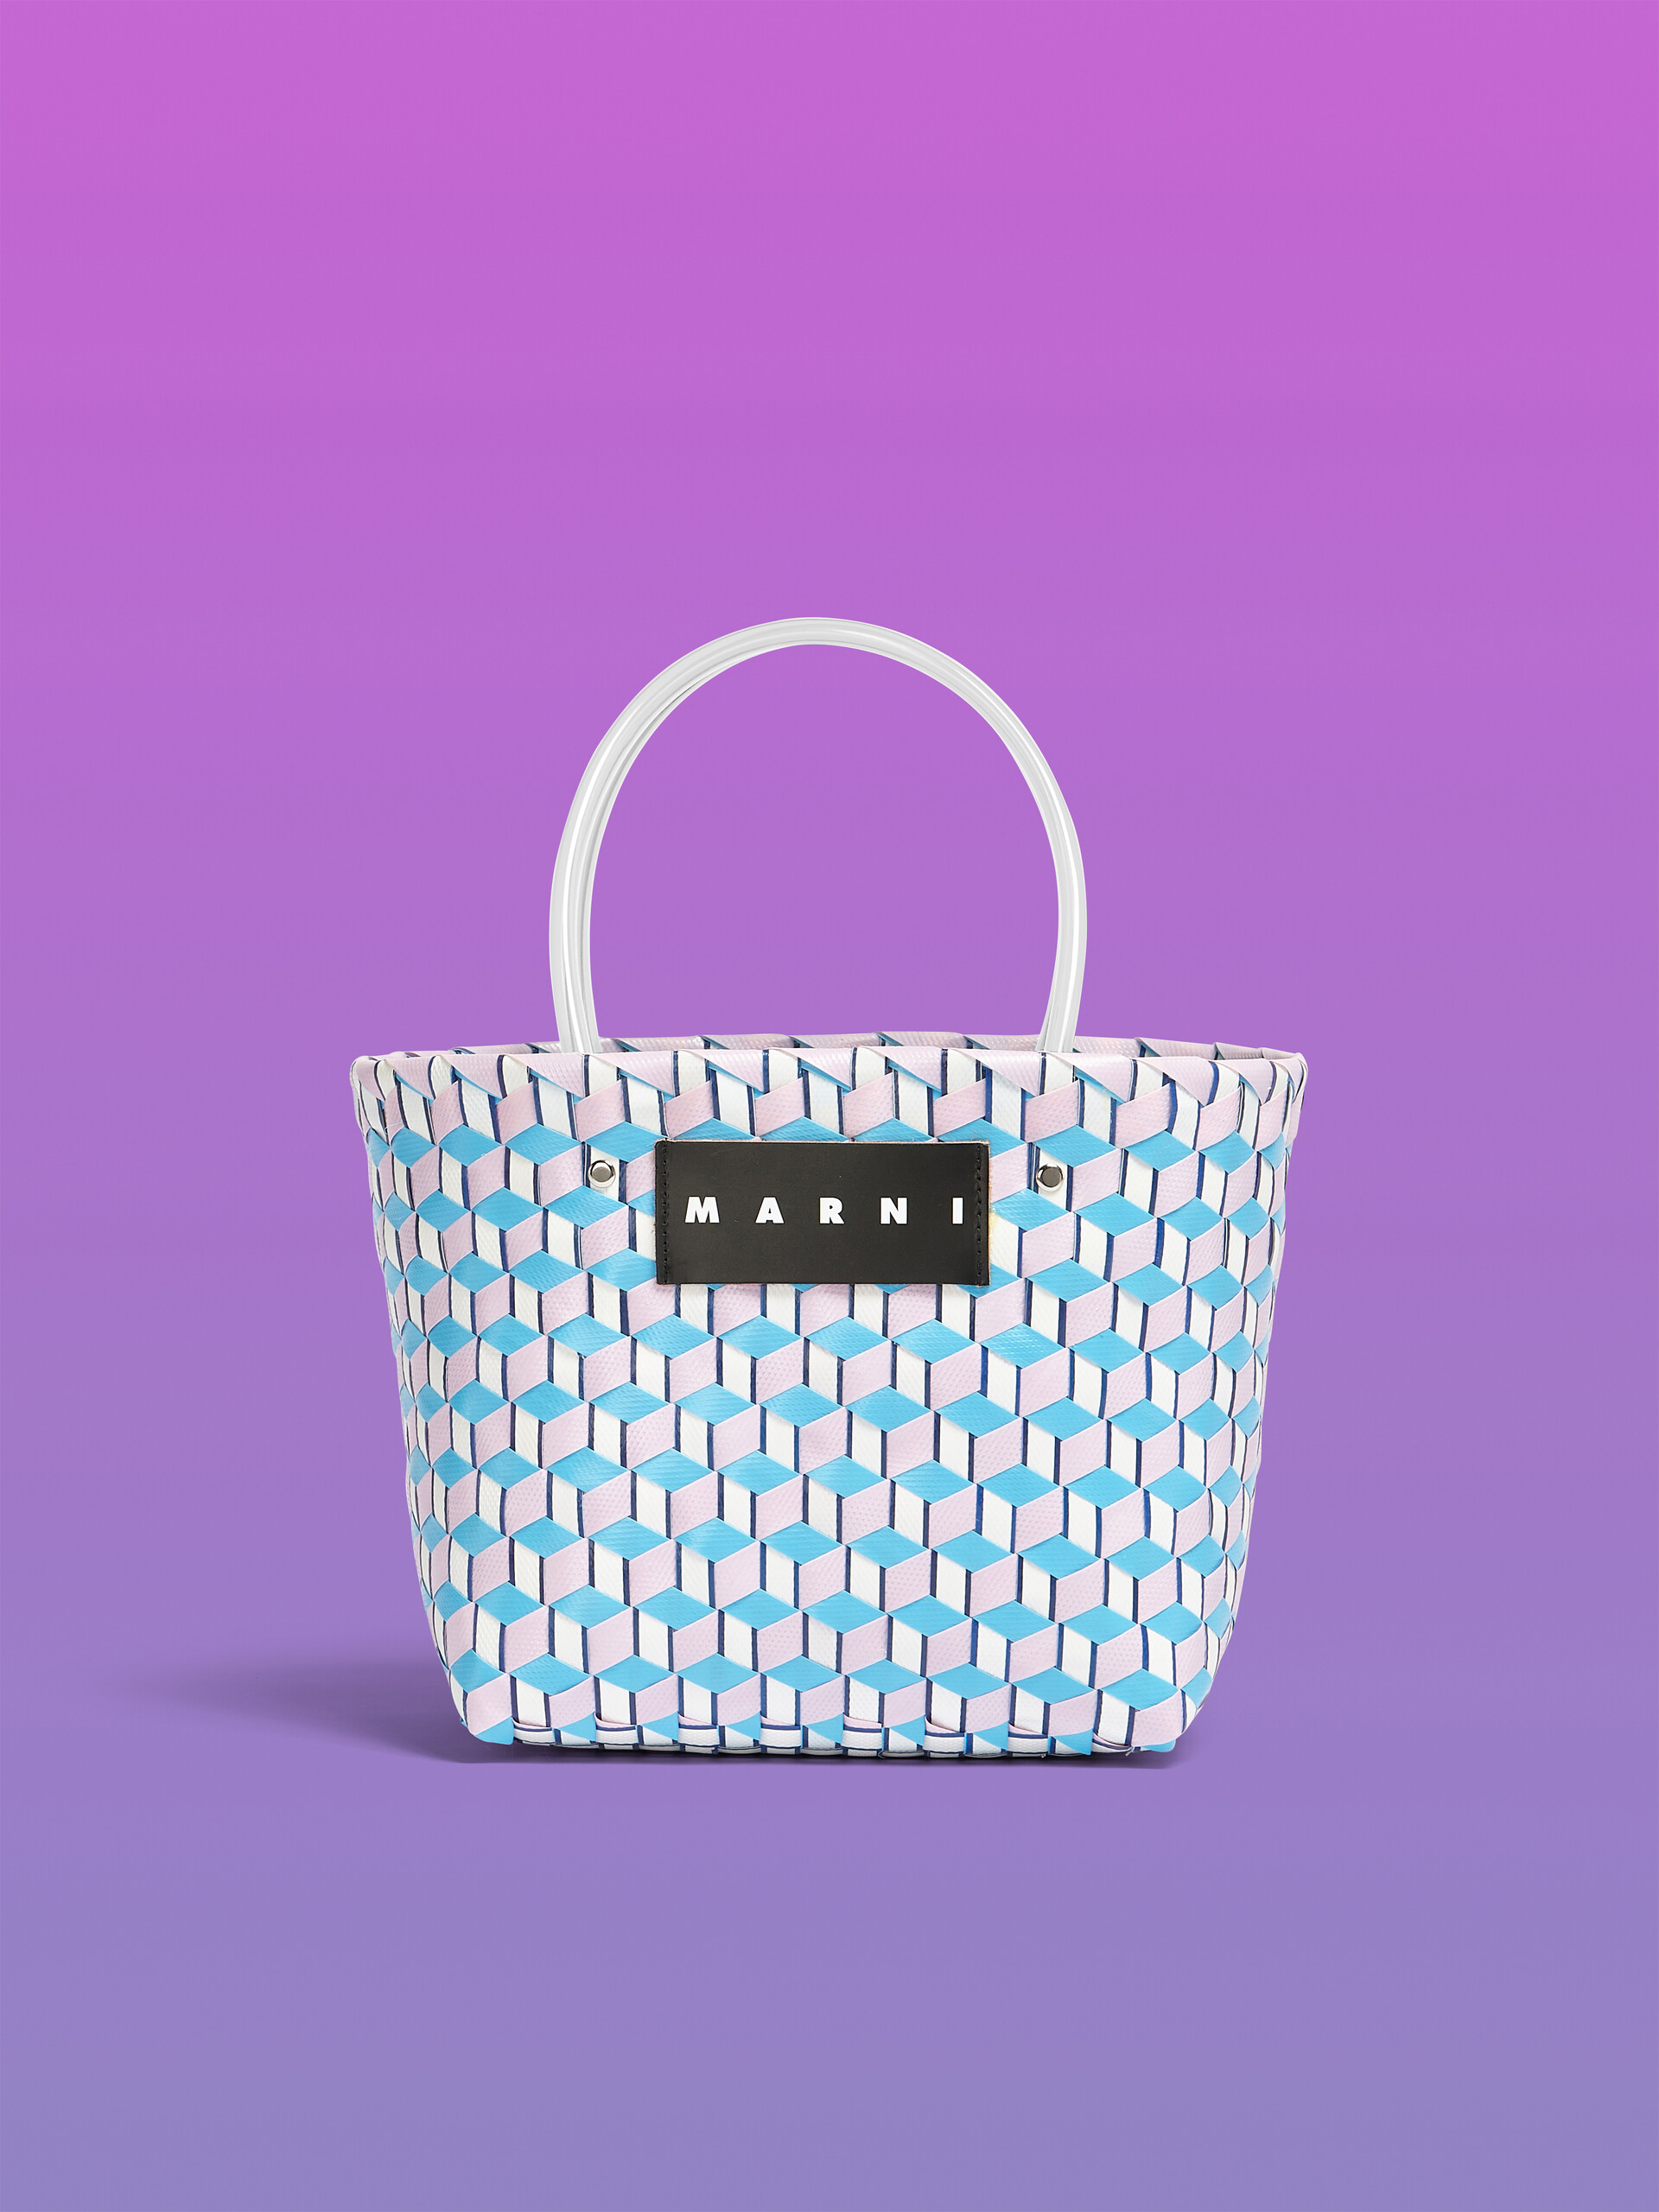 MARNI MARKET 3D BAG in pale blue cube woven material